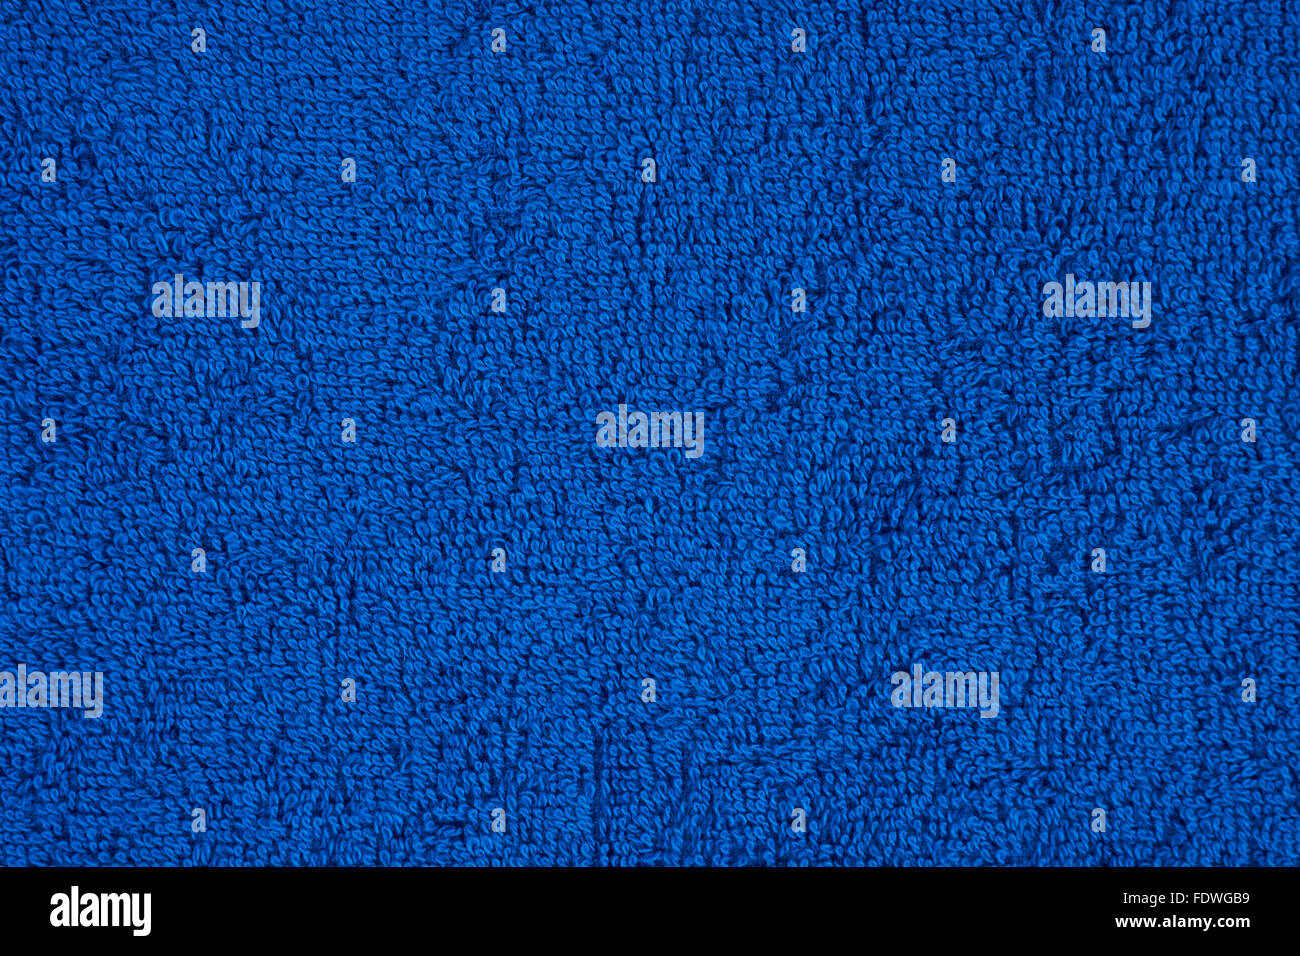 Dark blue terry towel as a seamless background Stock Photo